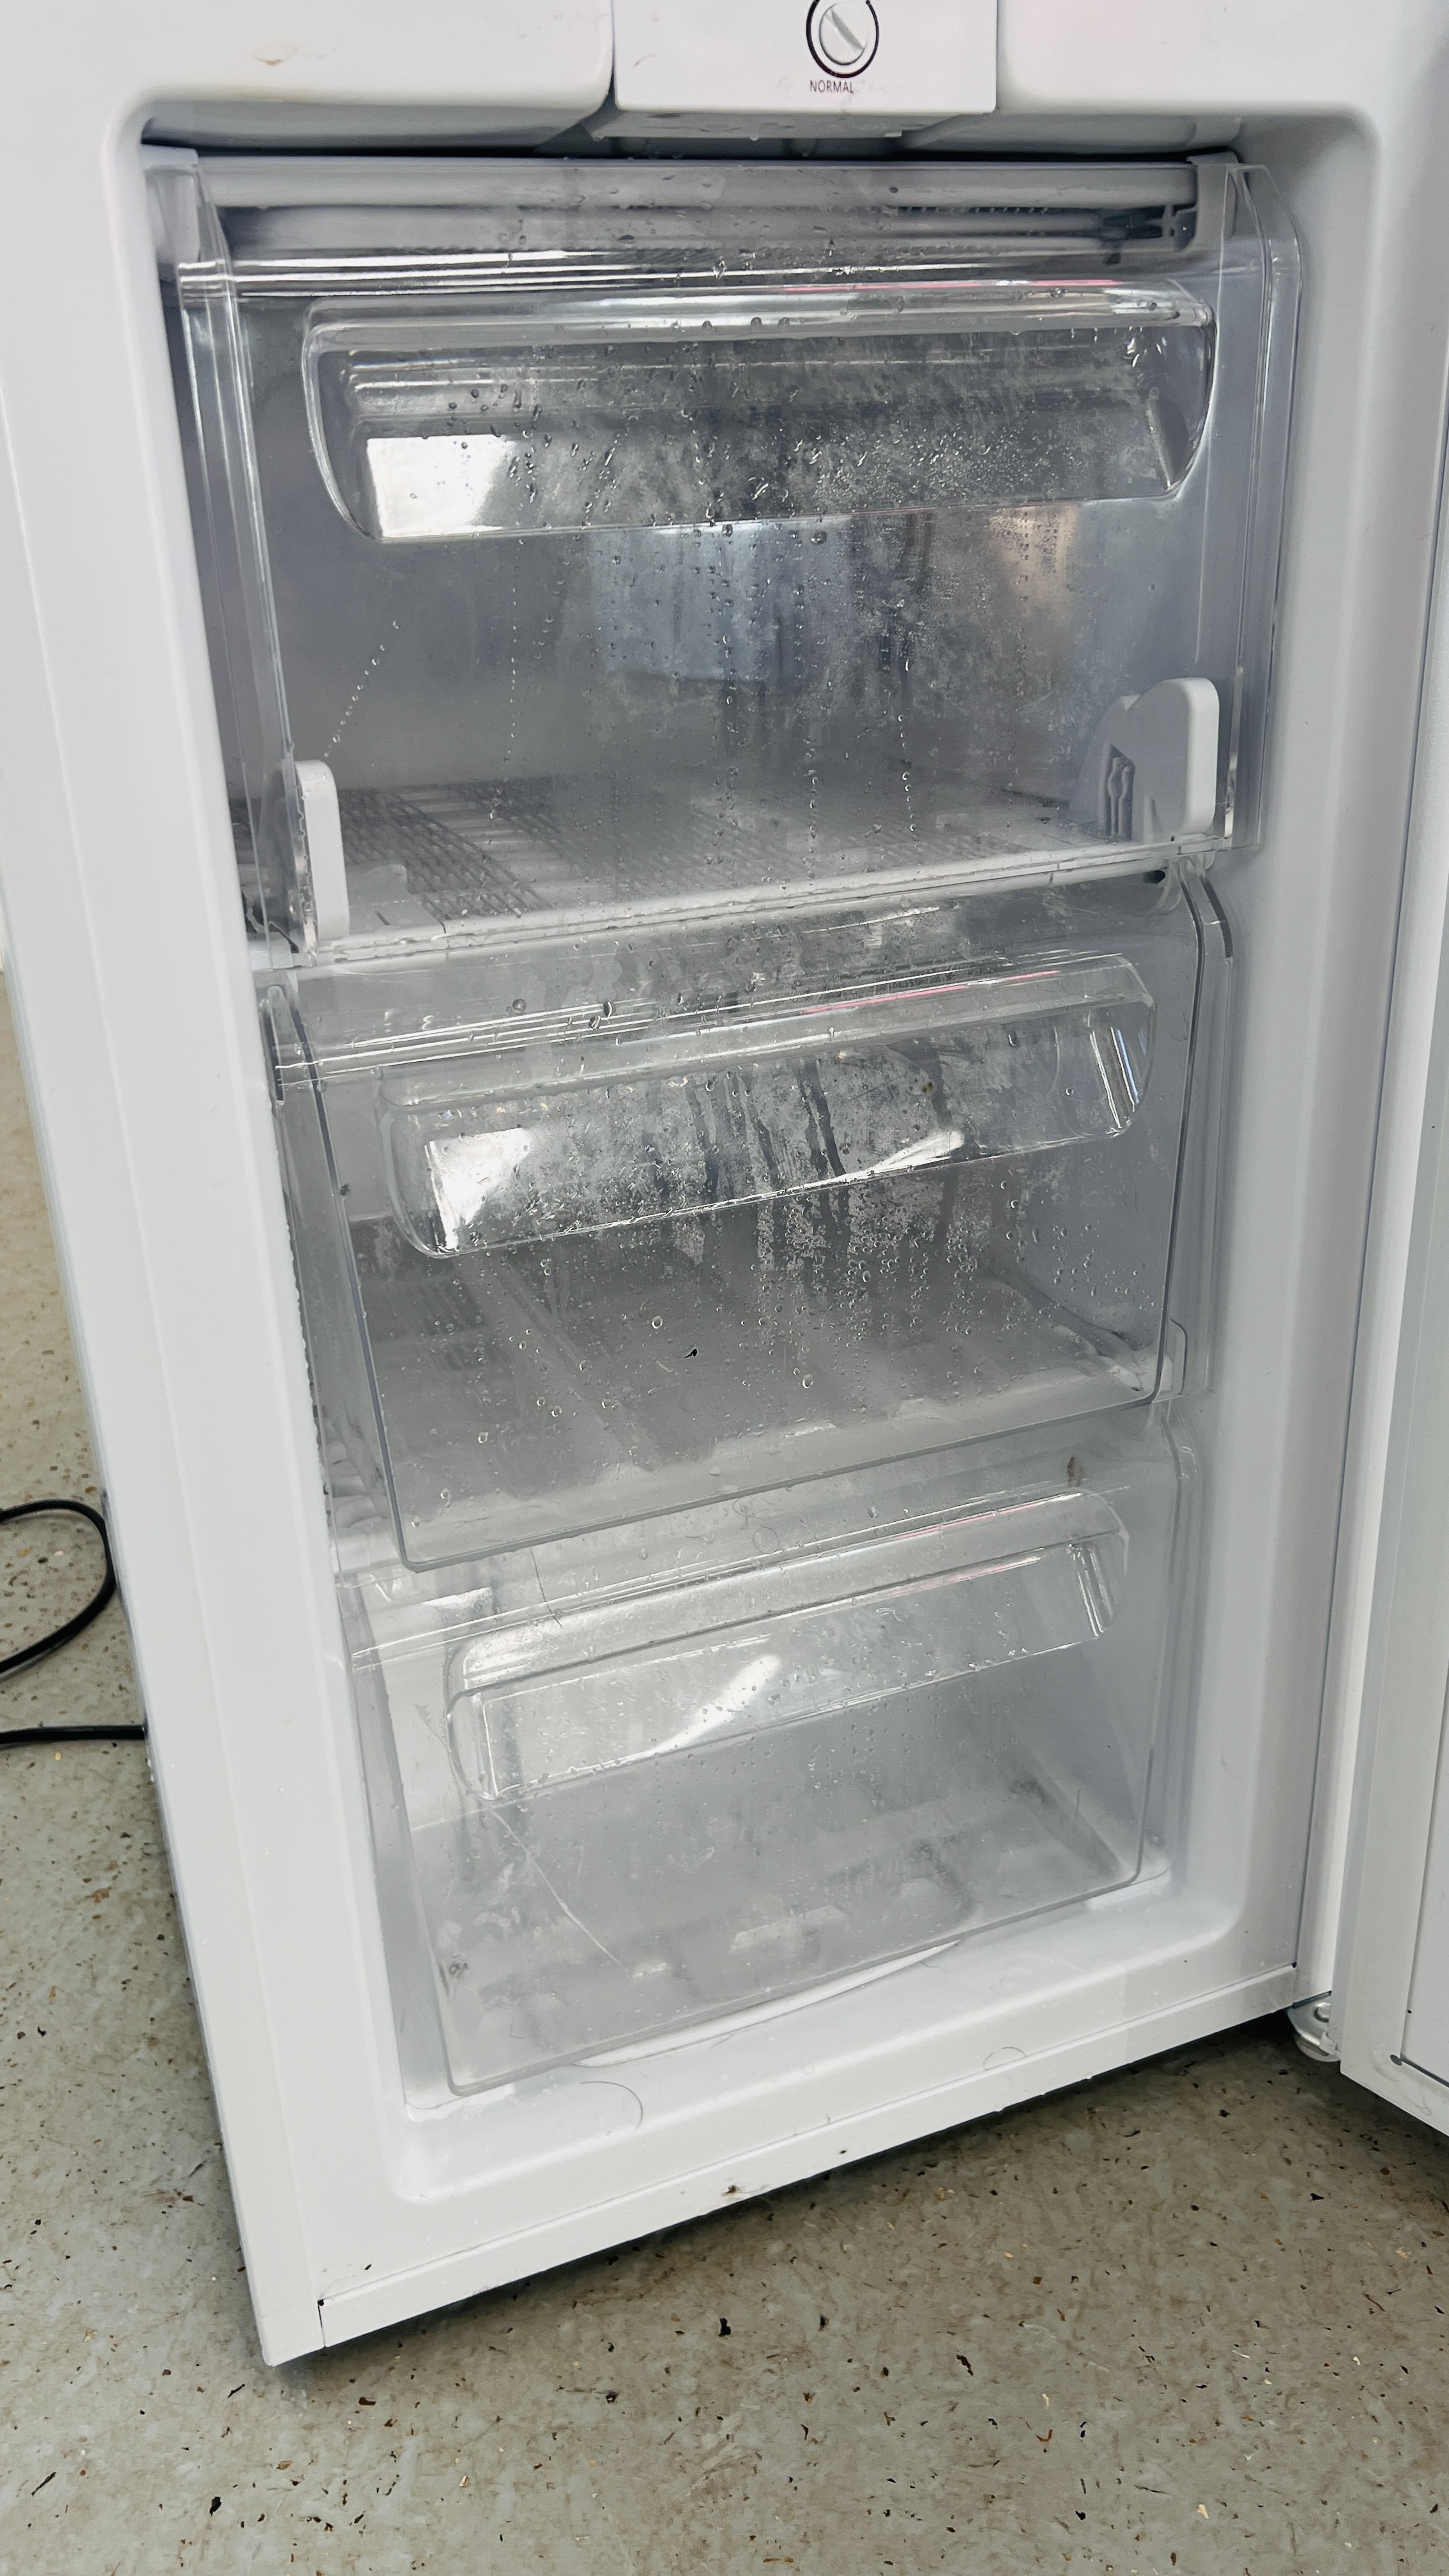 AN UNBRANDED UNDERCOUNTER THREE DRAWER FREEZER - SOLD AS SEEN. - Image 6 of 6